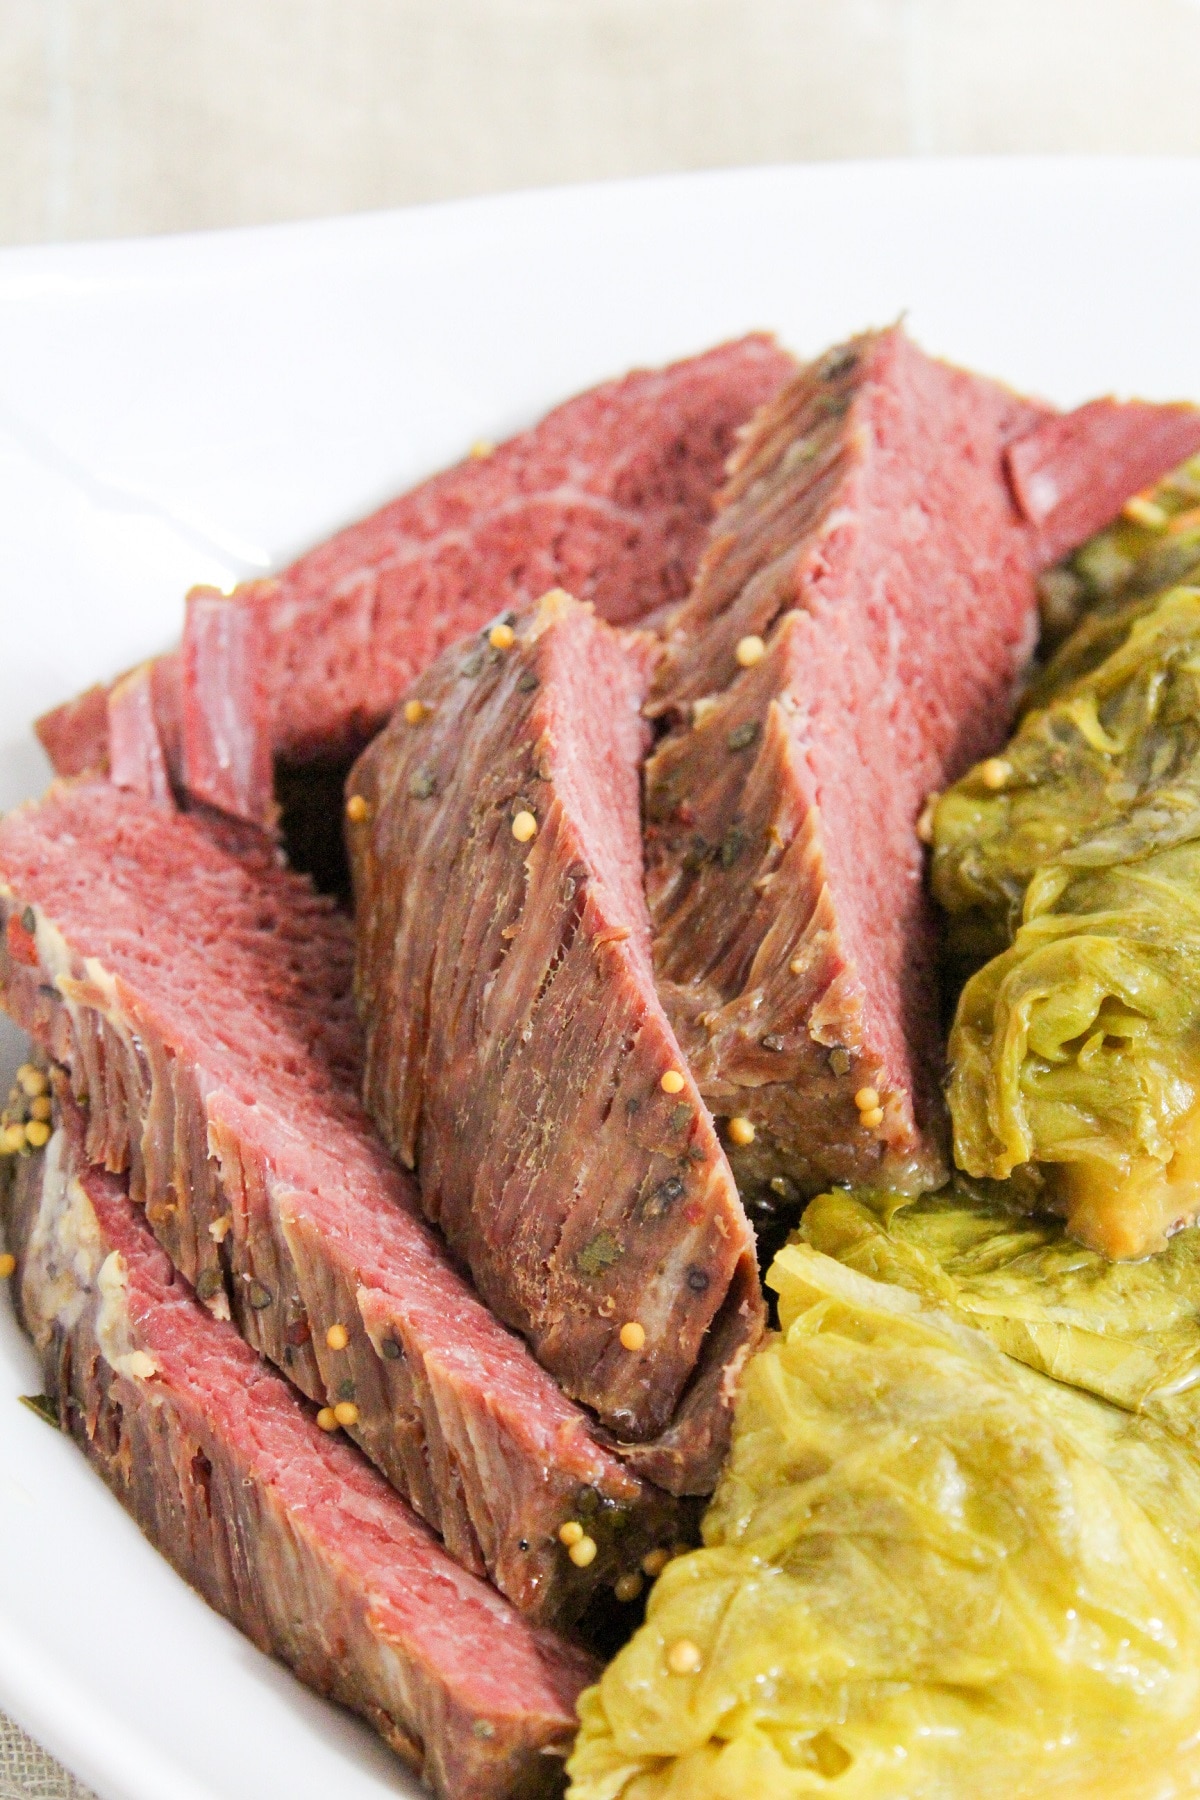 sliced corned beef with cabbage